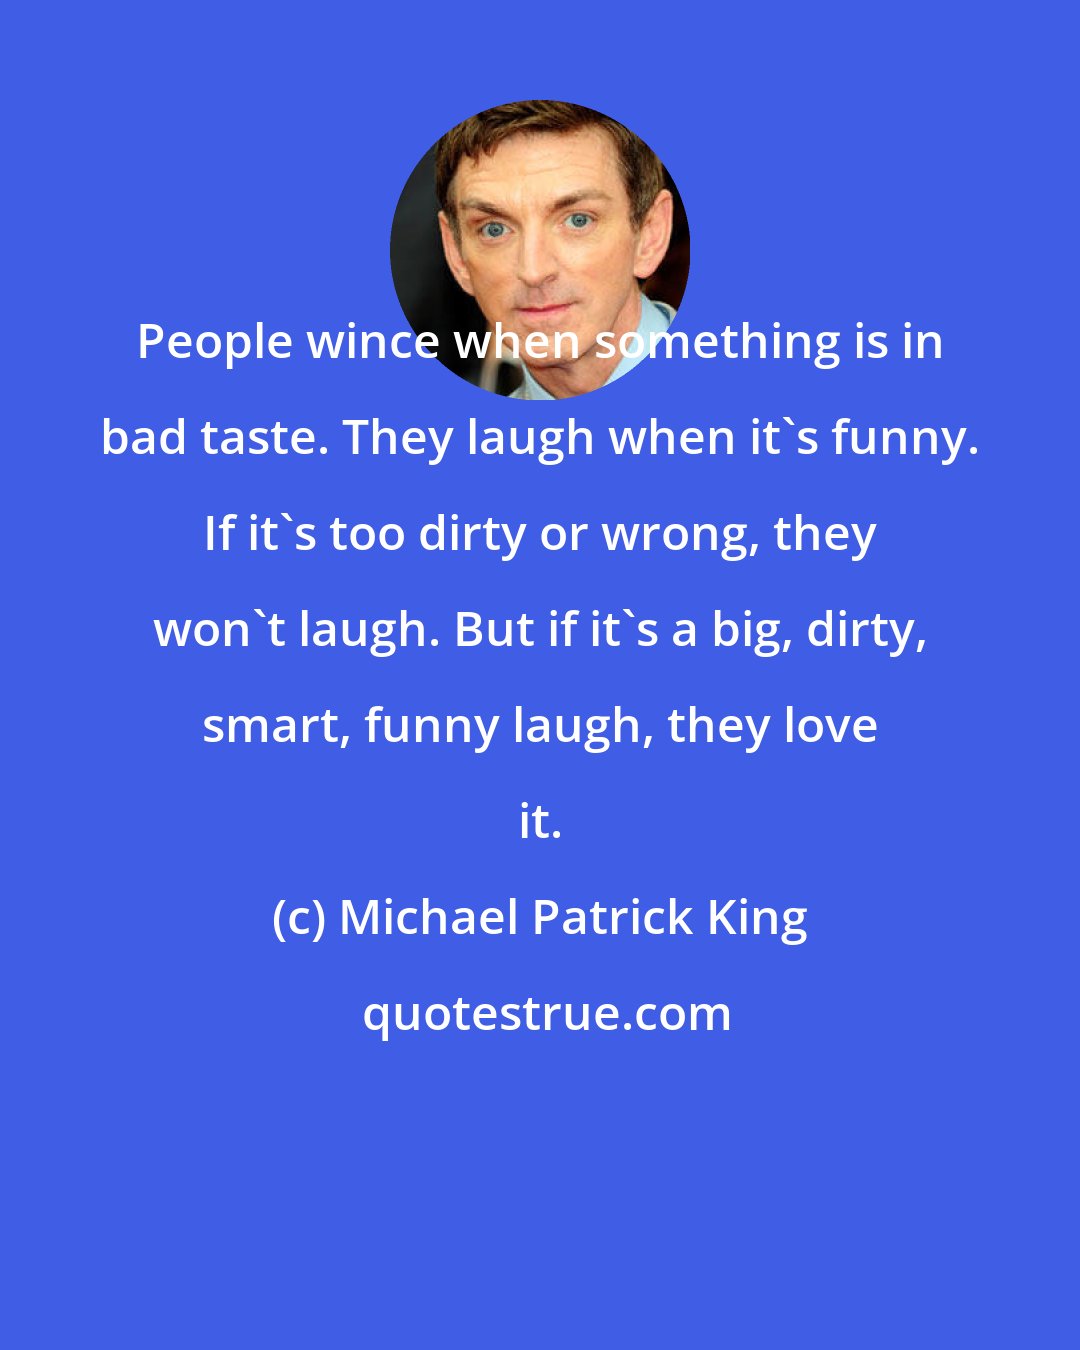 Michael Patrick King: People wince when something is in bad taste. They laugh when it's funny. If it's too dirty or wrong, they won't laugh. But if it's a big, dirty, smart, funny laugh, they love it.